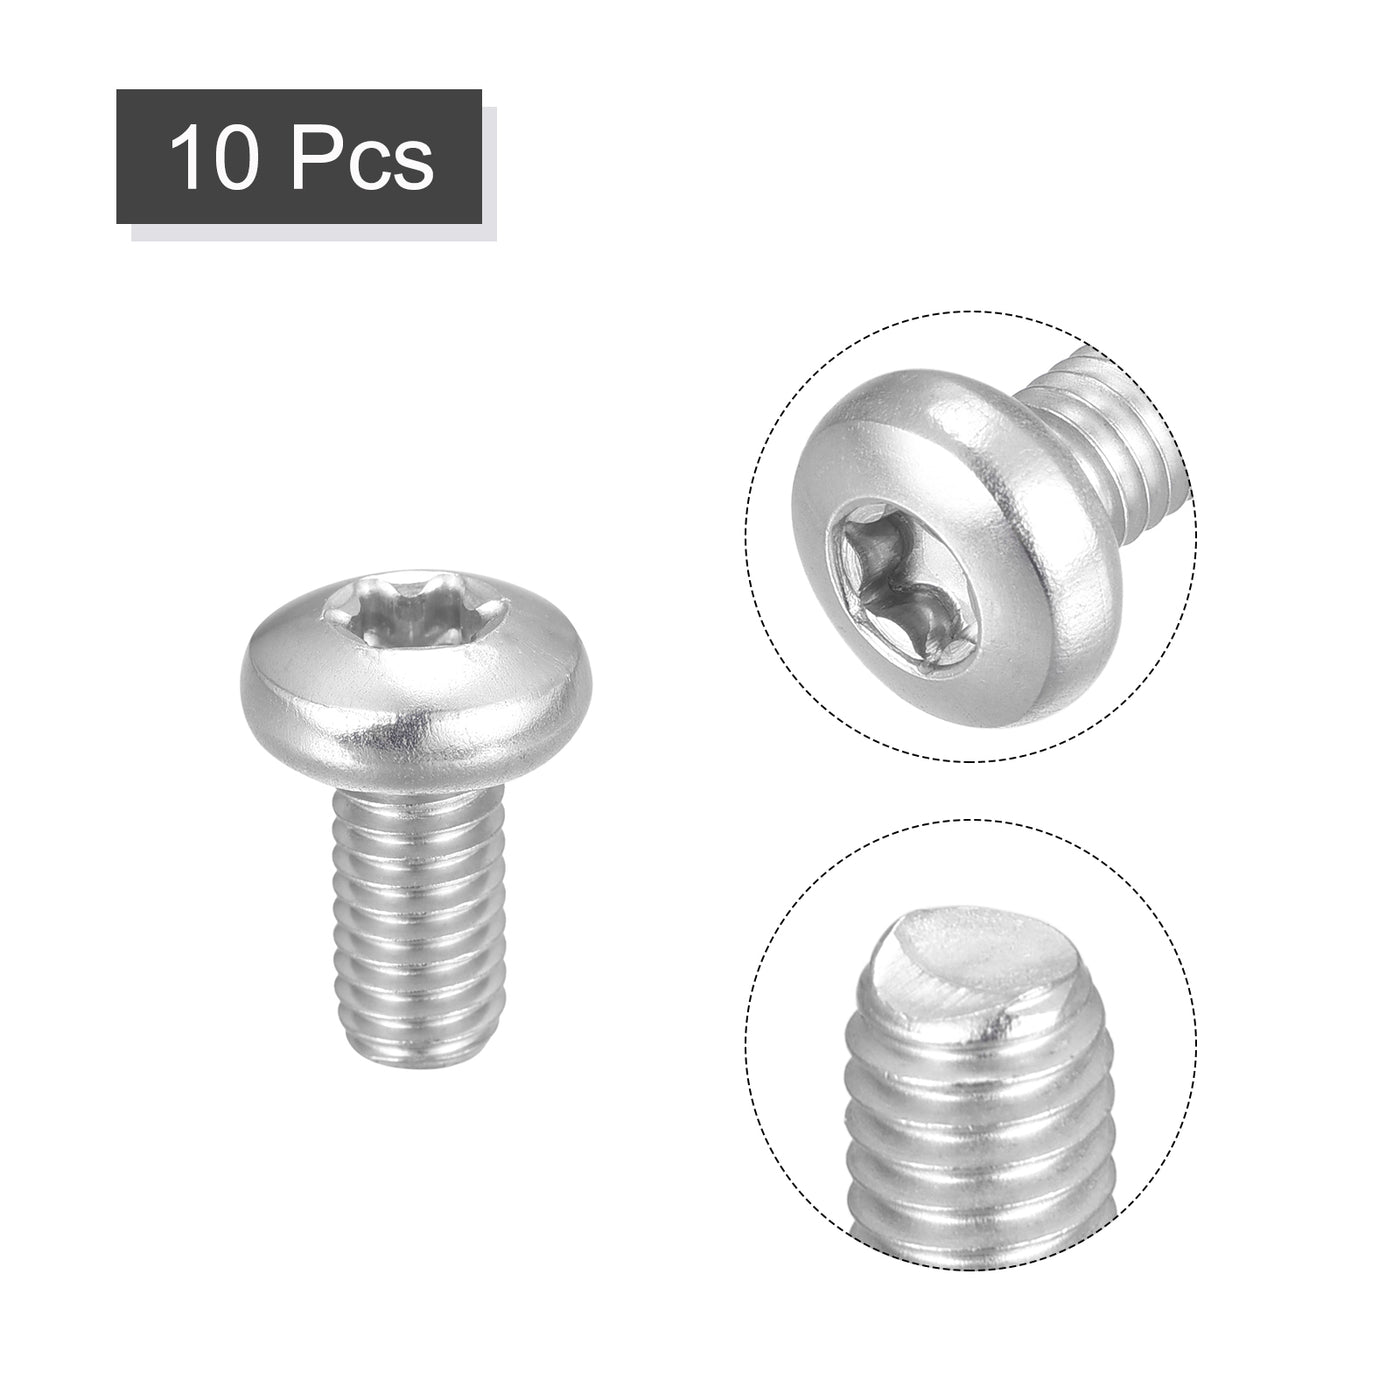 uxcell Uxcell M6x12mm Torx Security Machine Screws, 10pcs 316 Stainless Steel Pan Head Screw